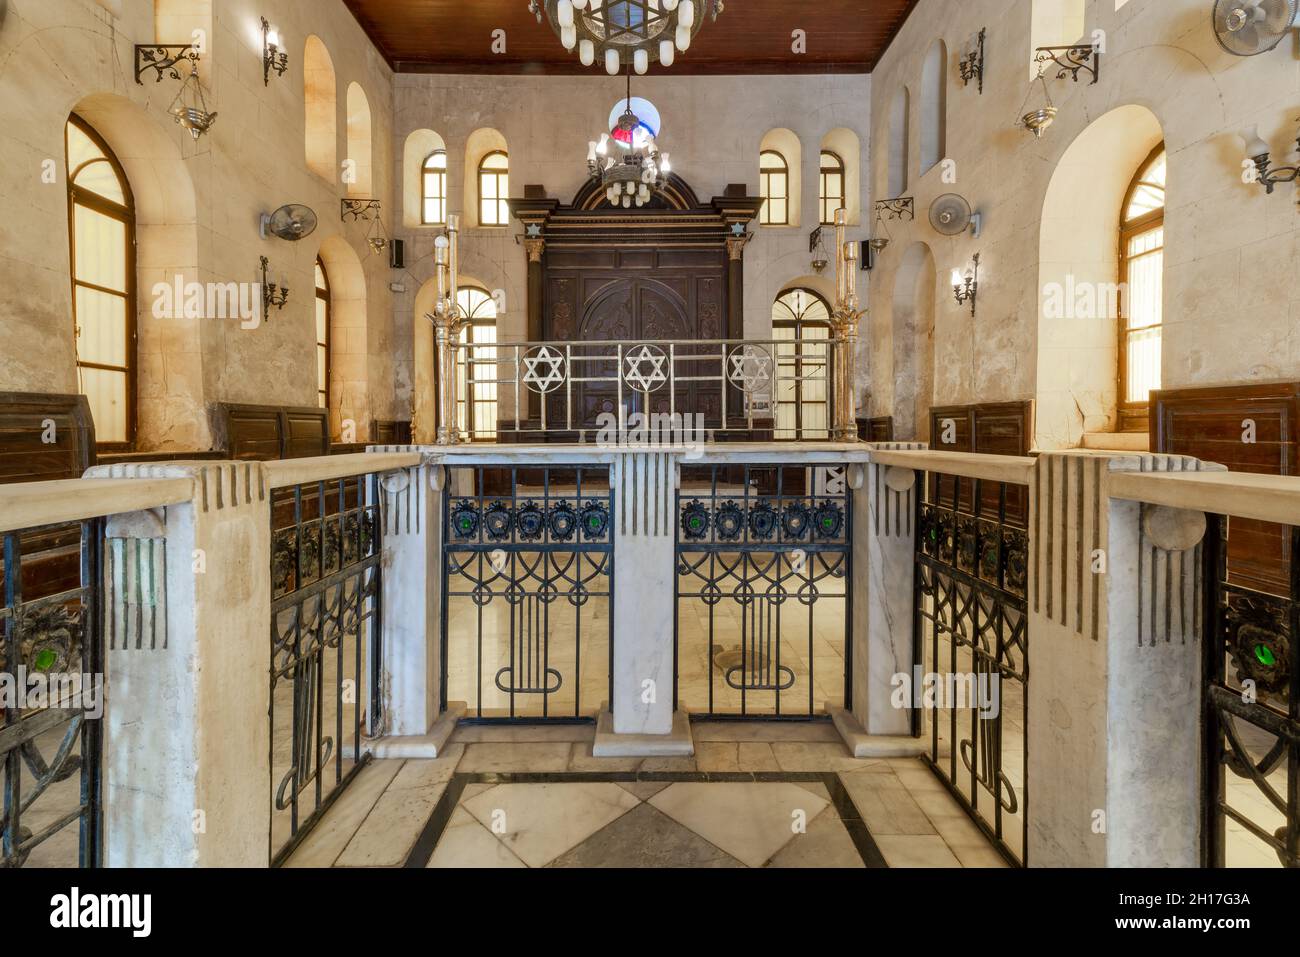 Altar of historic Jewish Maimonides Synagogue or Rav Moshe Synagogue with wooden entrance at the far end, Gamalia district, Cairo, Egypt Stock Photo